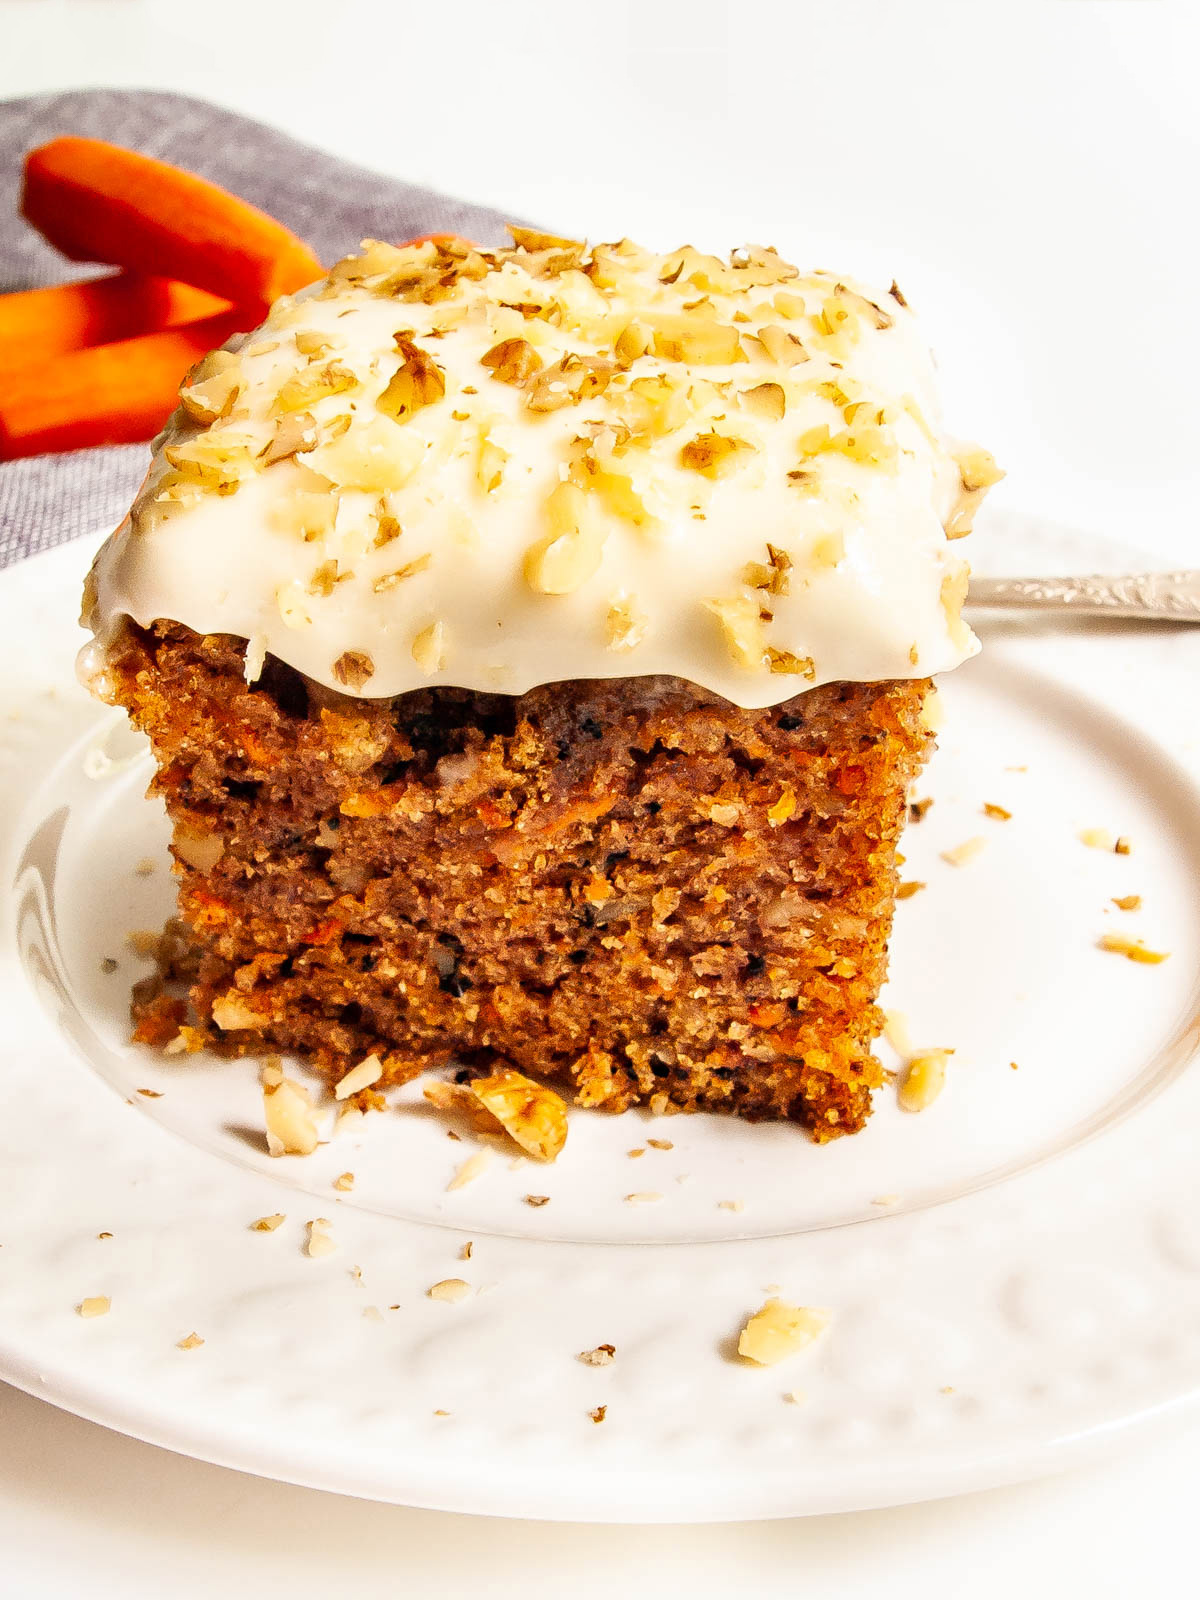 a slice of carrot cake on a plate